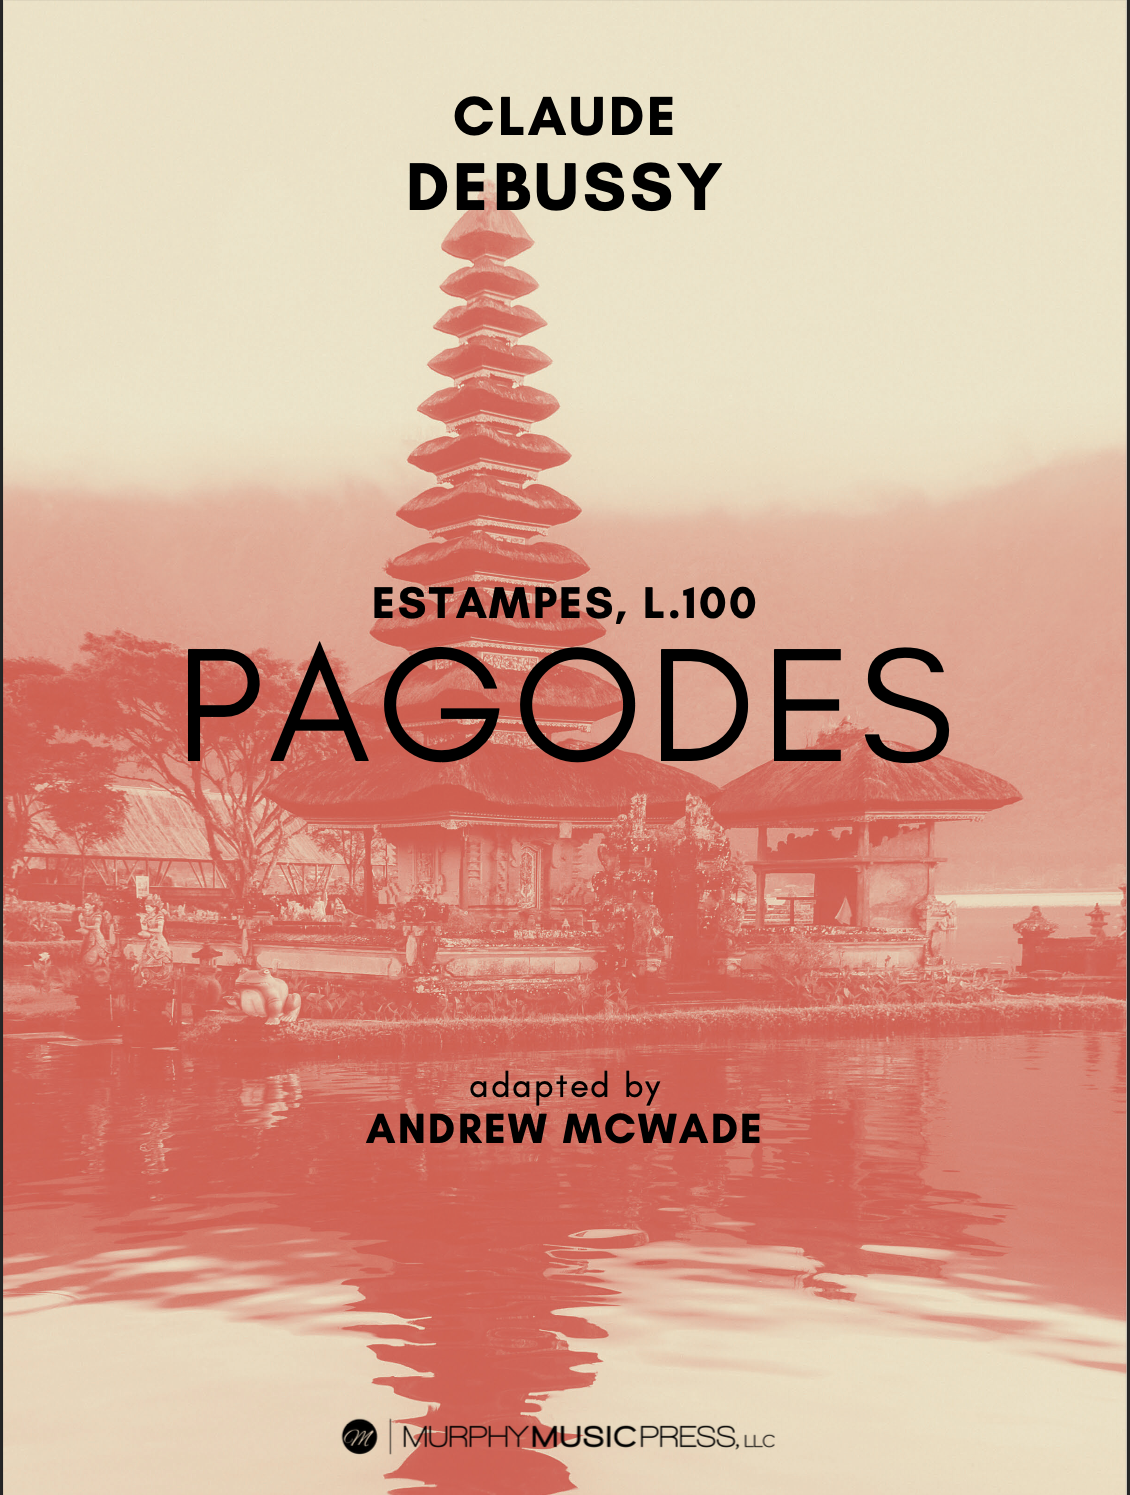 Pagodes (Score Only) by Calude Debussy adapted by Andrew McWade